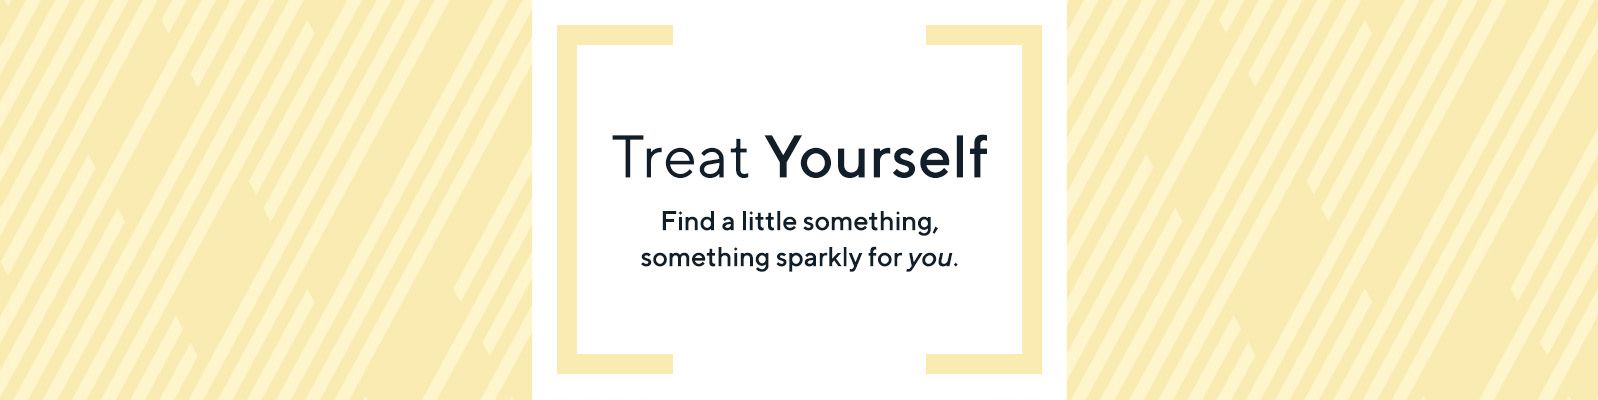 Treat Yourself Find a little something, something sparkly for you.